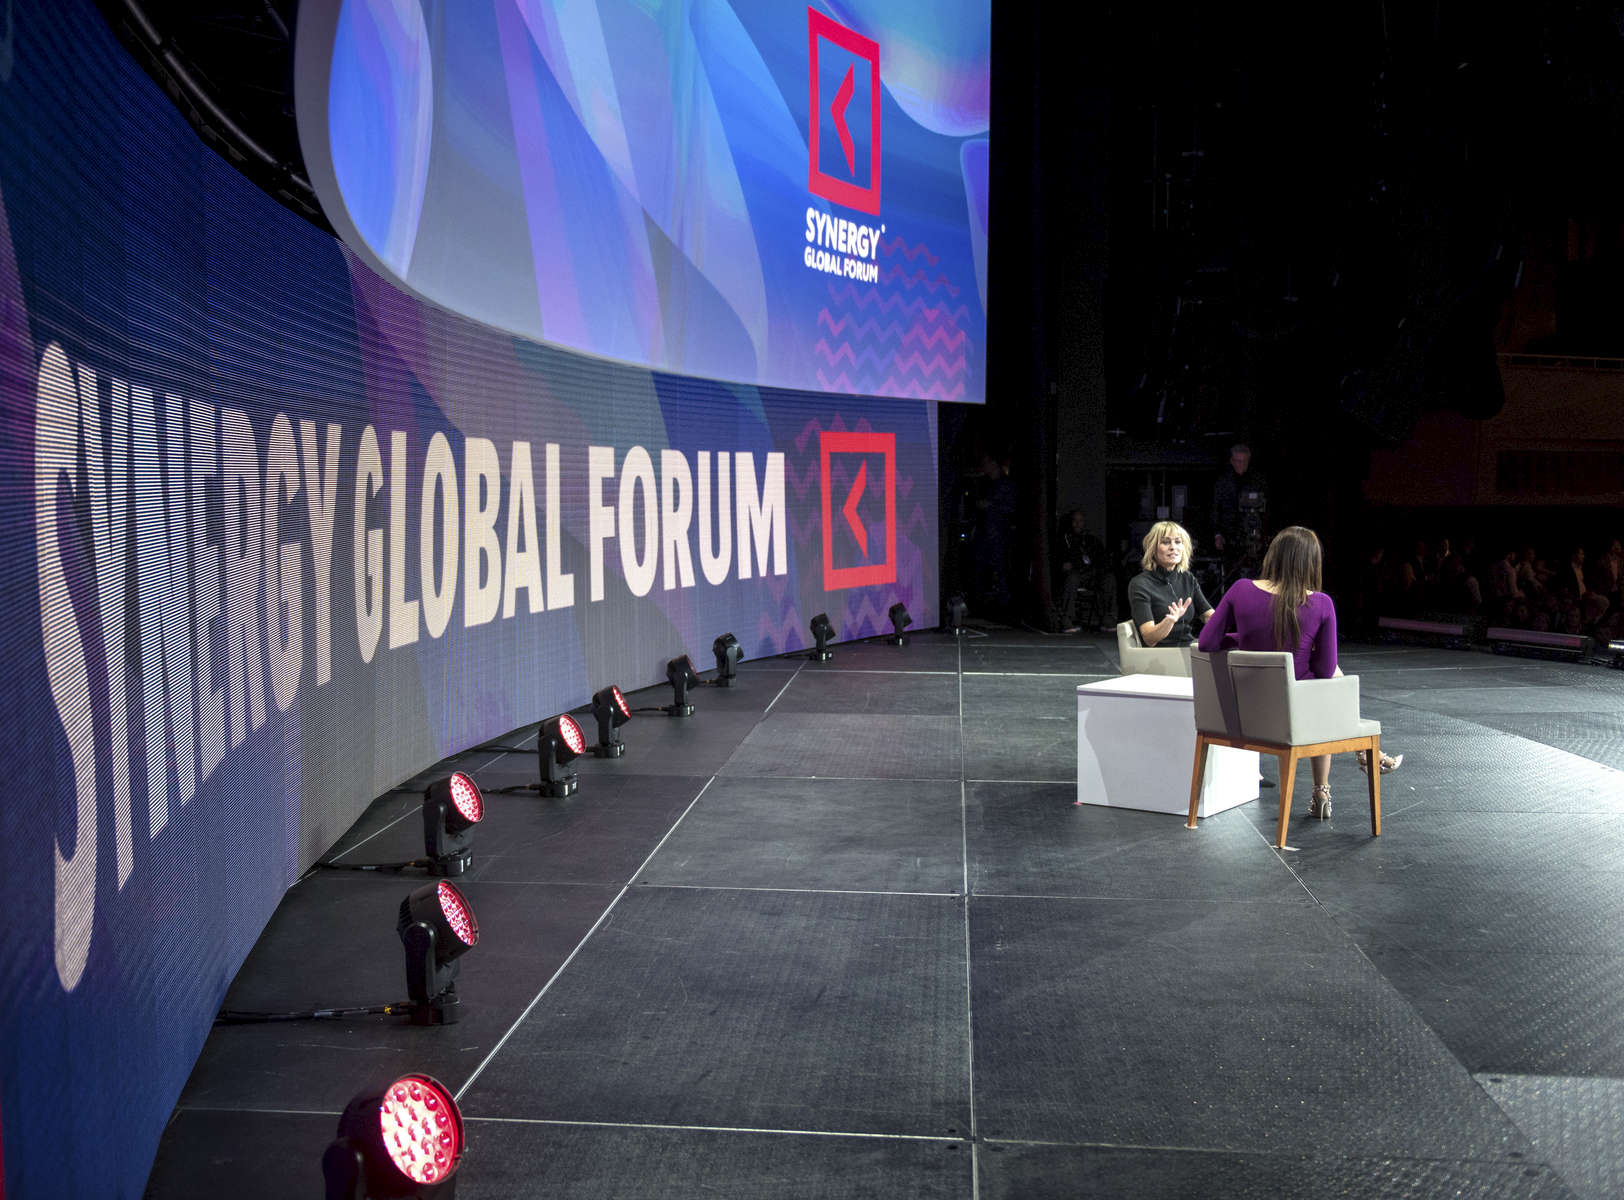 Robin Wright  is speaking at the Synergy Global Forum NY at The Theater at Madison Square Garden October 28, 2017. Photo by Ron Wyatt Photography